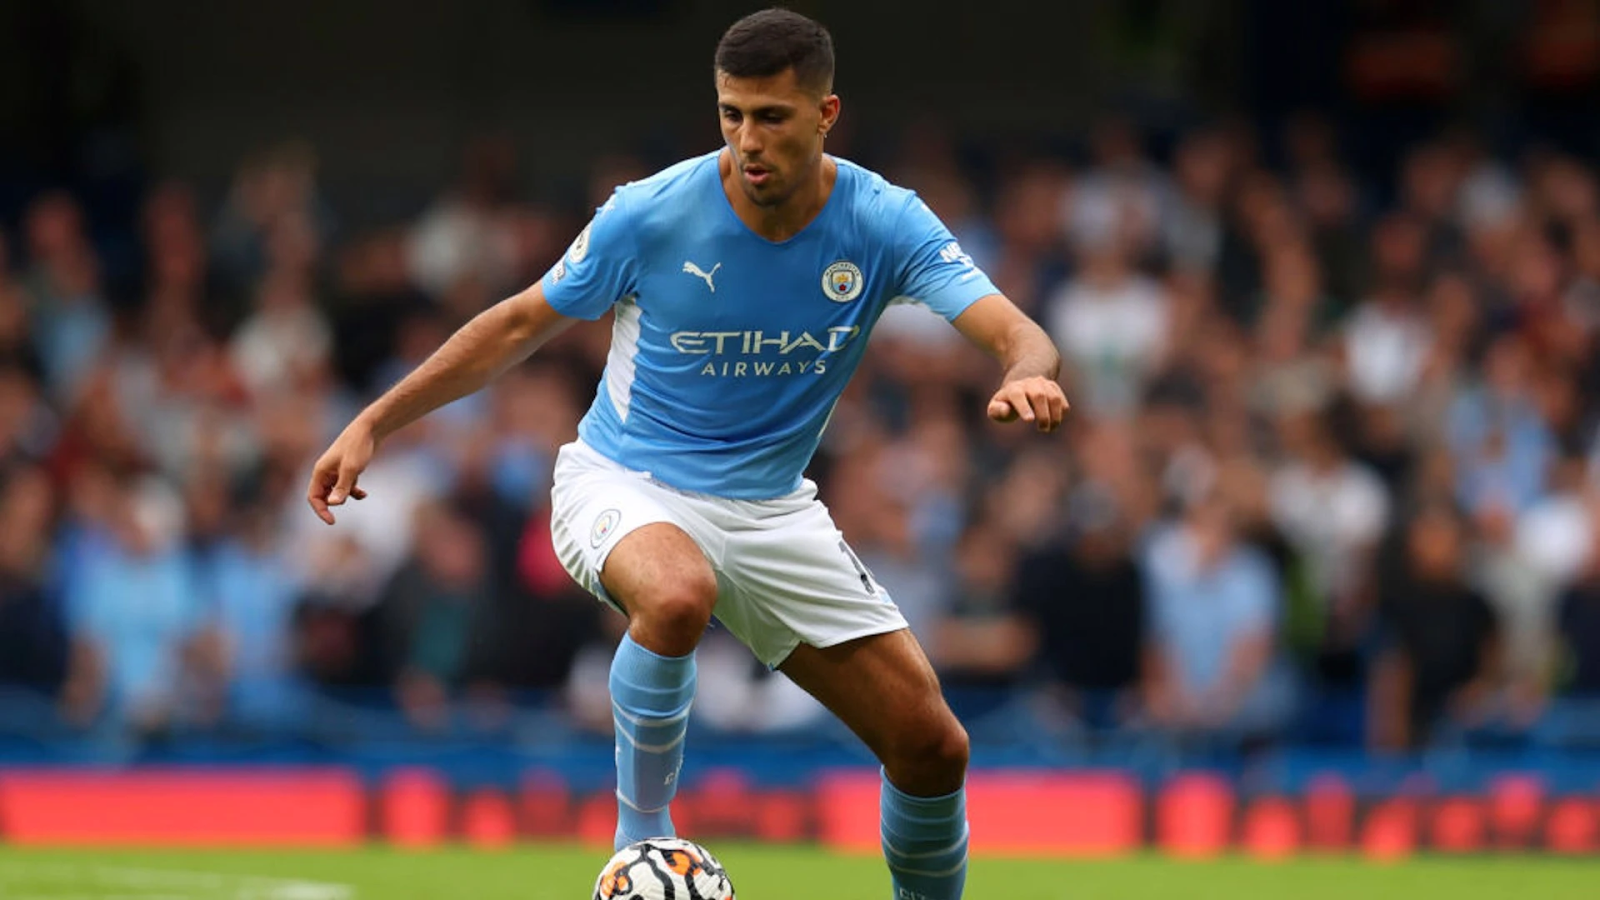 Rodri was Manchester City’s controller-in-chief in the midfield